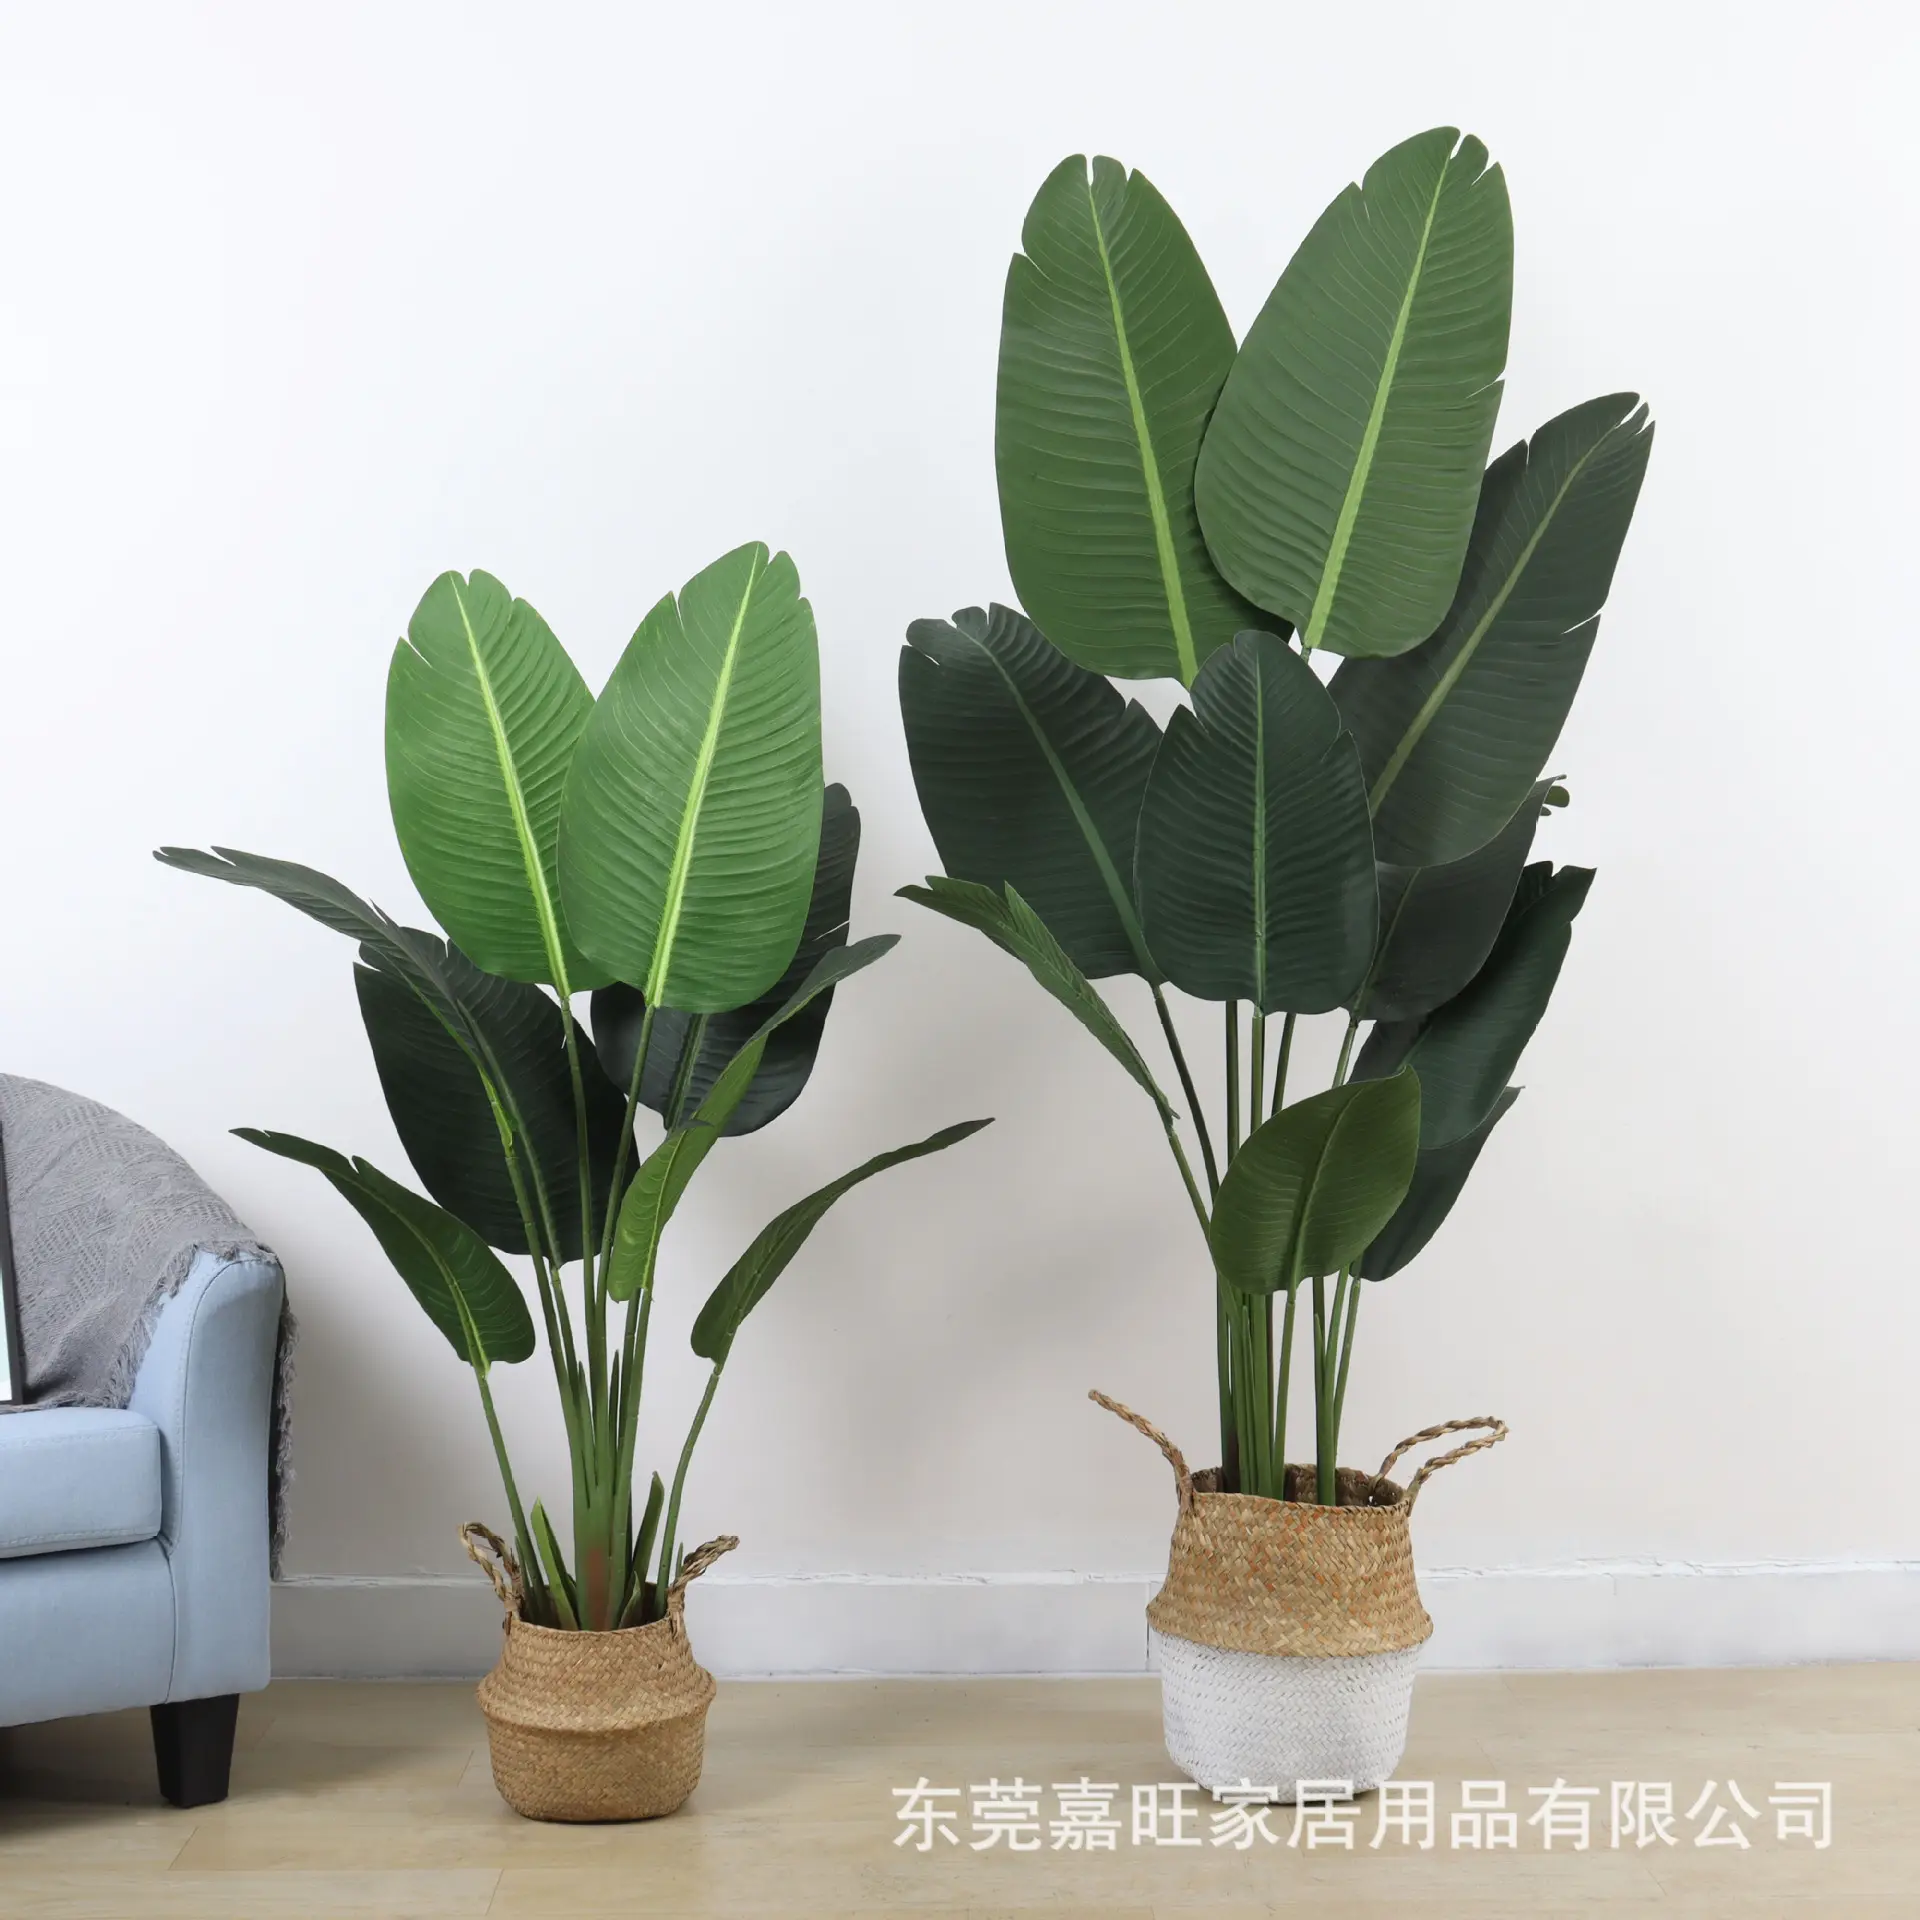 Large Faux Areca Palm Green Monstera Bonsai Tree Plastic Olive Tree Banana Plants Artificial Trees For Indoor Outdoor Decor